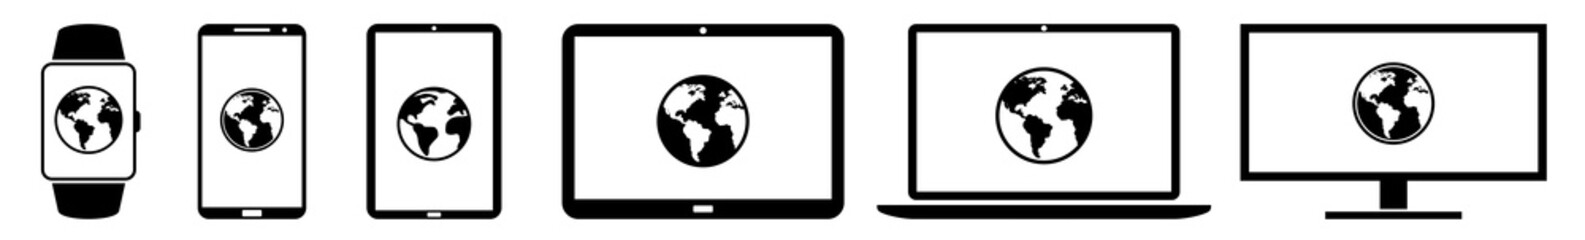 Display world, planet, earth, globe, eco, ecology, geography Icon Devices Set | Web Screen Device Online | Laptop Vector Illustration | Mobile Phone | PC Computer Smartphone Tablet Sign Isolated